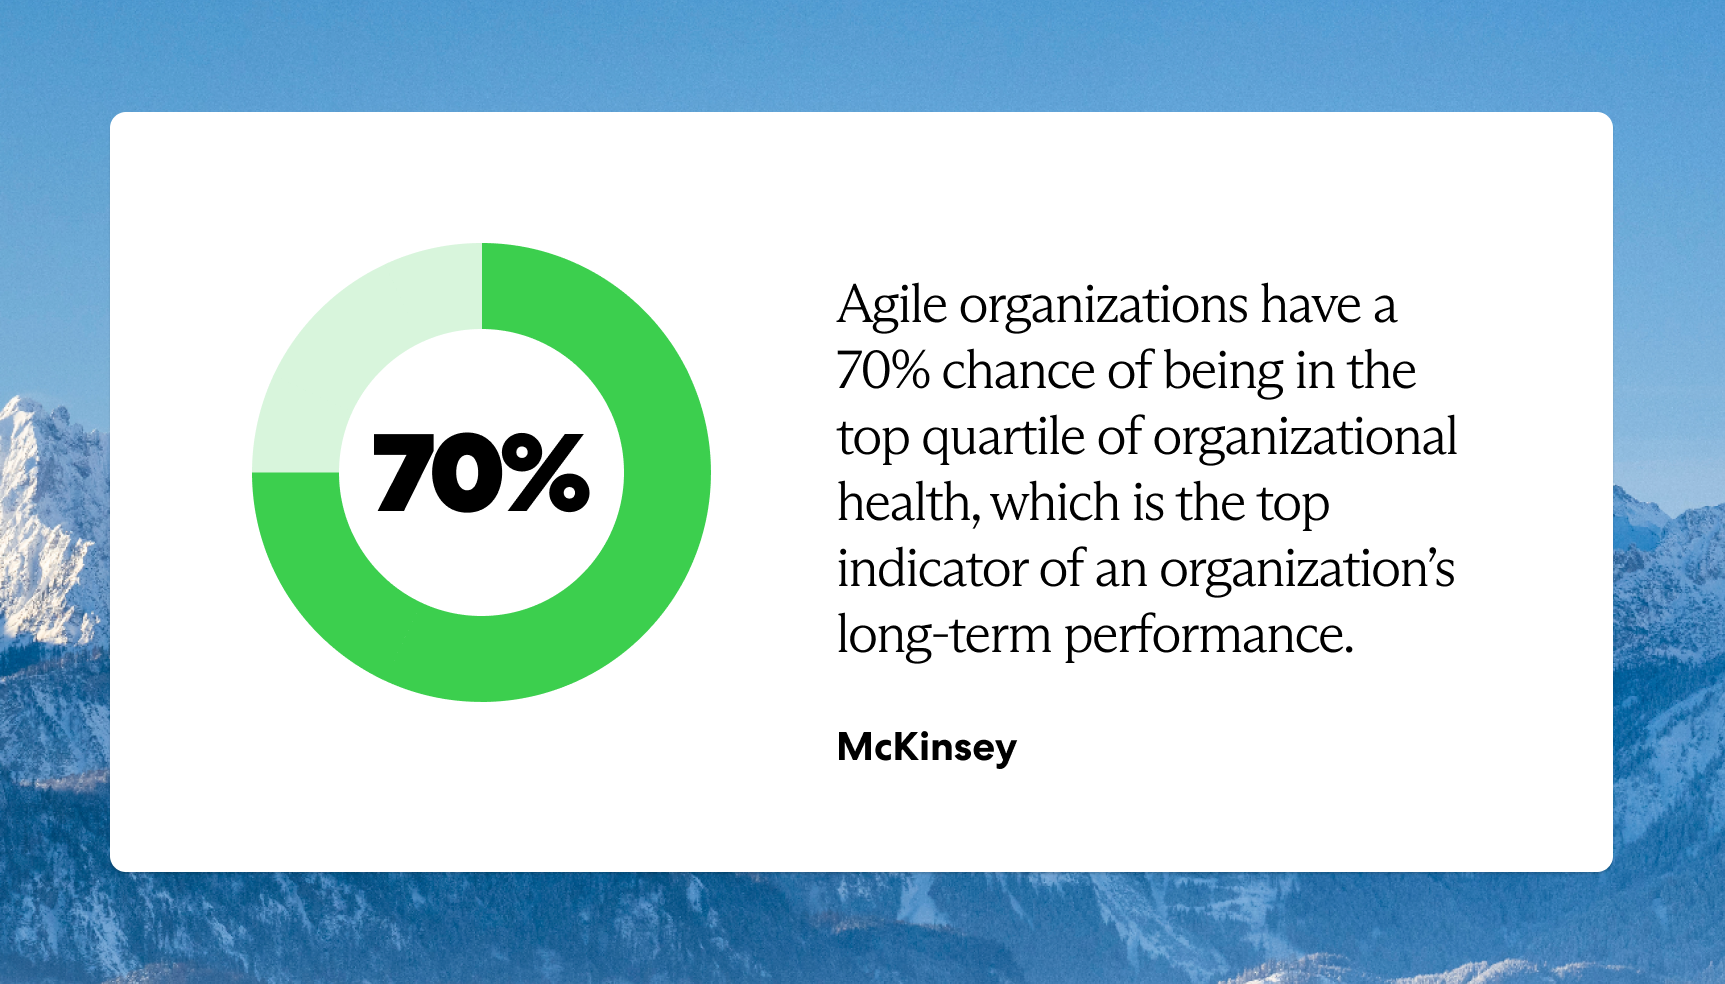 Agile organizations have a 70% chance of being in the top quartile of organizational health, which is the top indicator of an organization’s long-term performance.